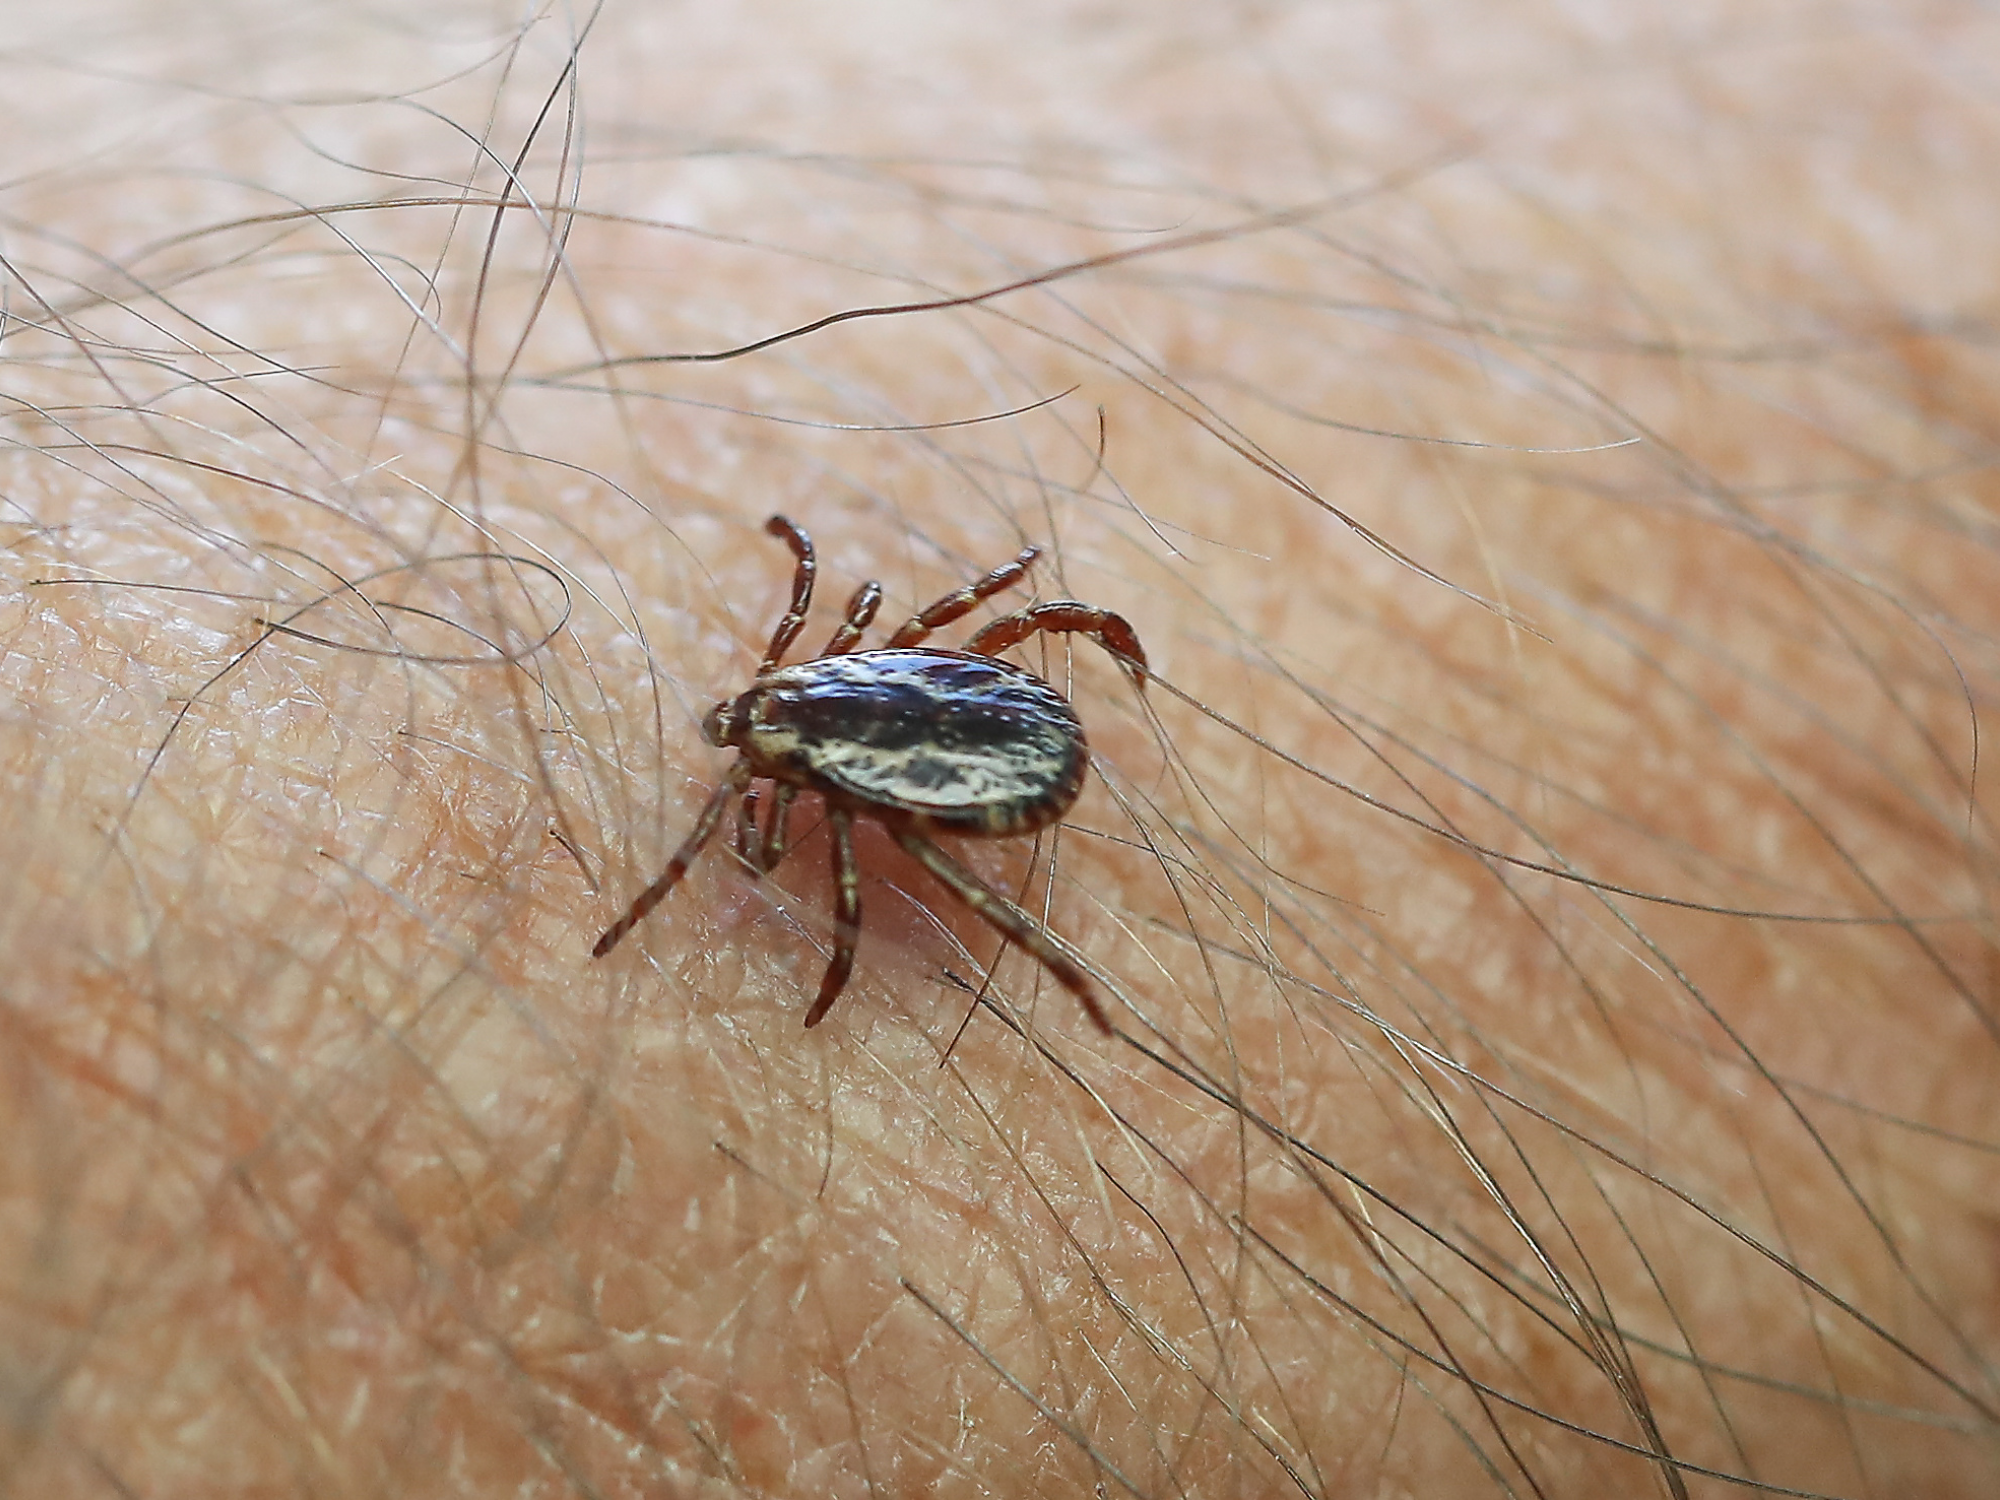 Photo of a blacklegged tick on a person's arm